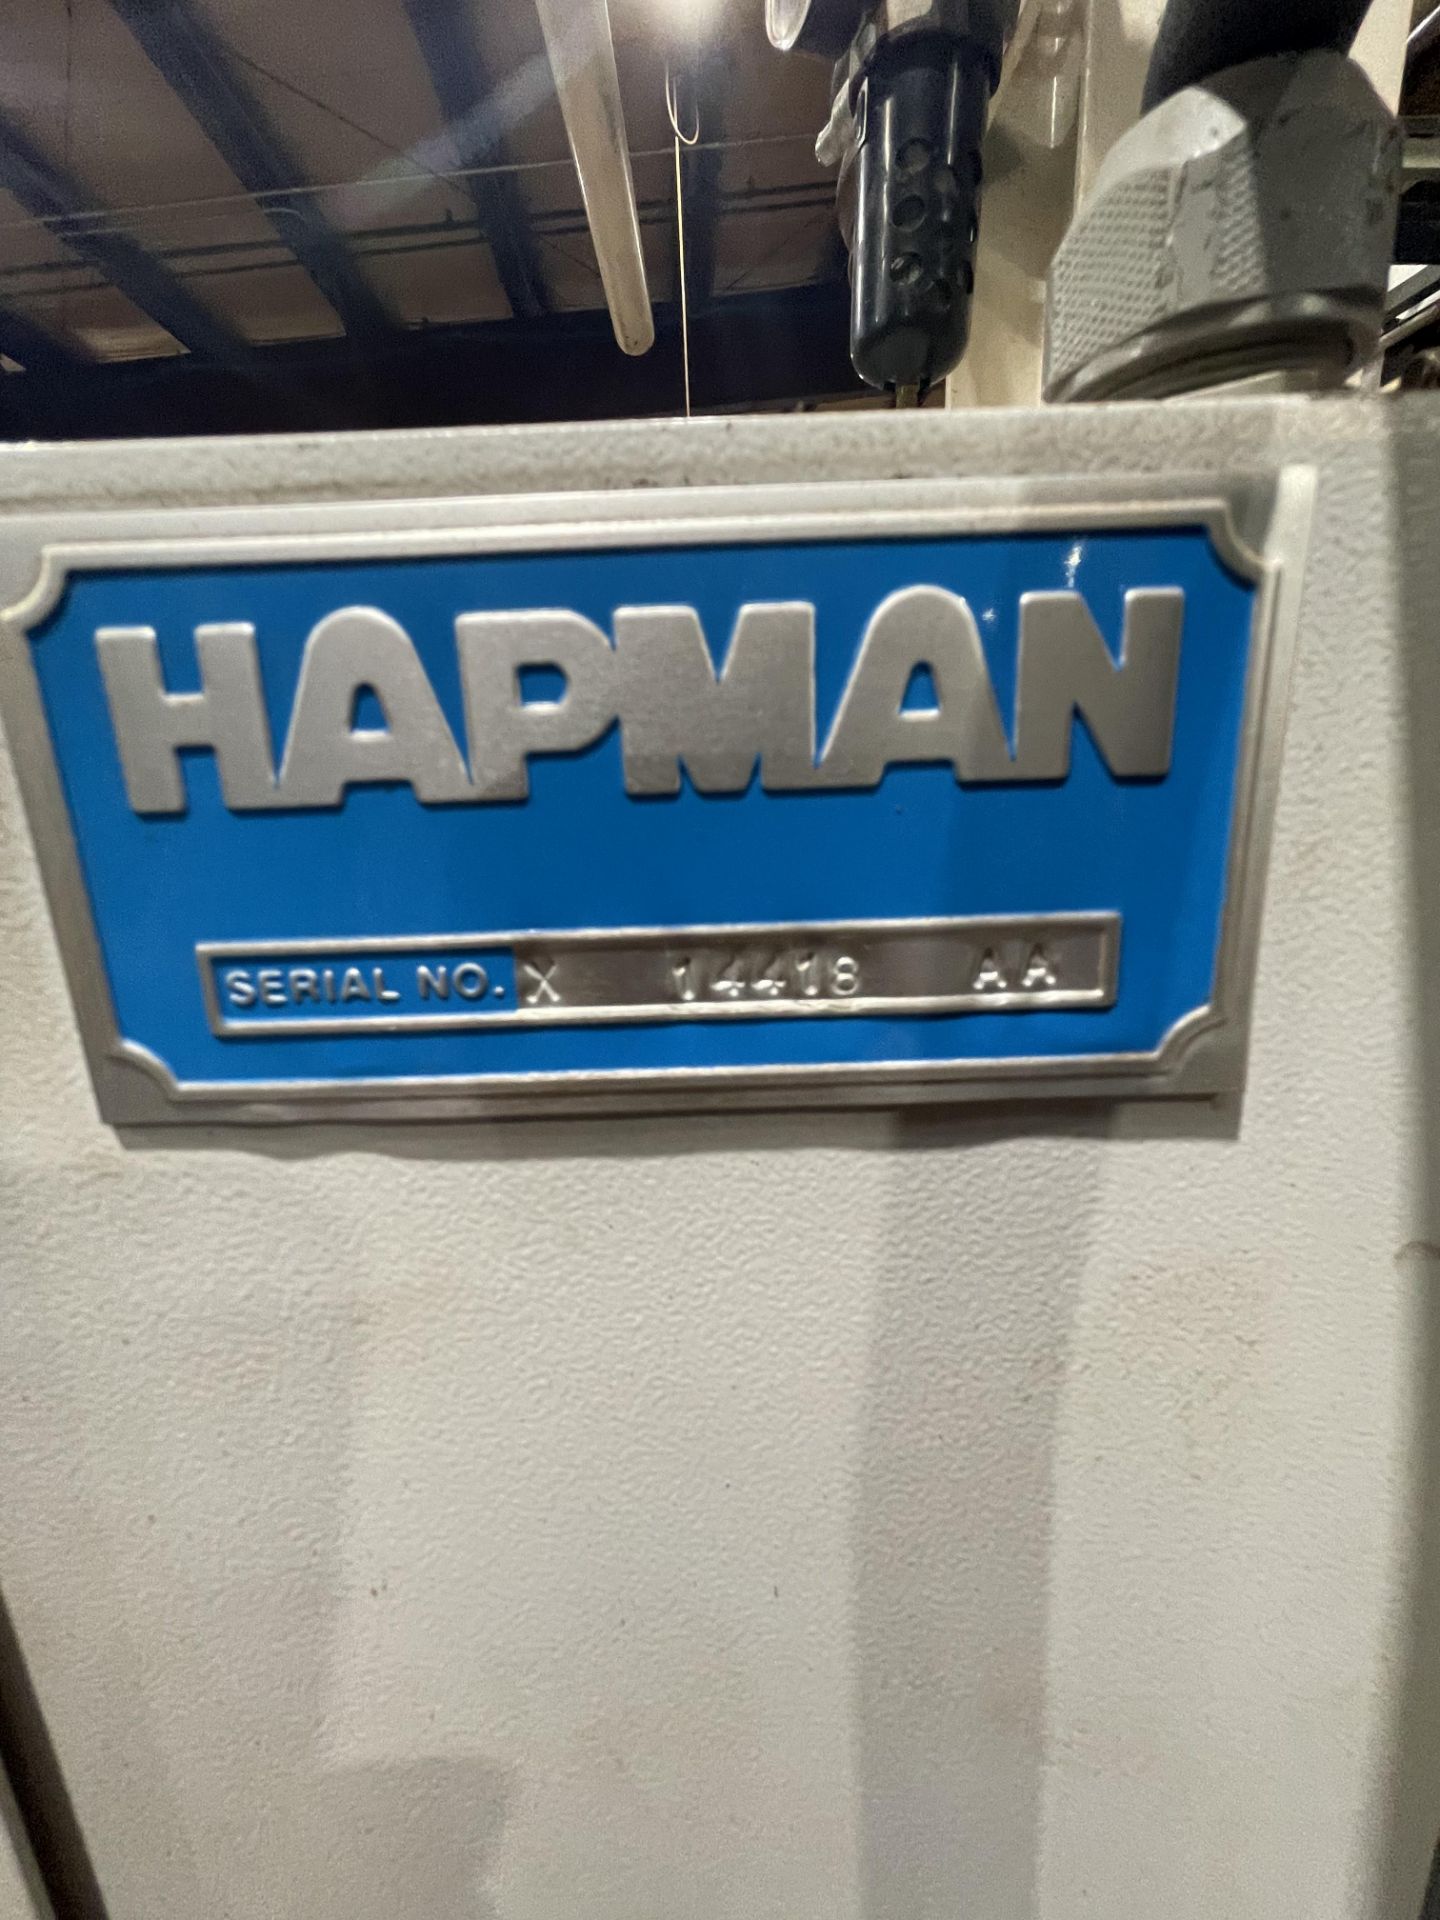 HAPMAN SUPERSAC LOADER, S/N 14418 AA, PORTABLE / MOUNTED ON CASTERS, STERLING ELECTRIC 1 HP, 1750 - Image 6 of 18